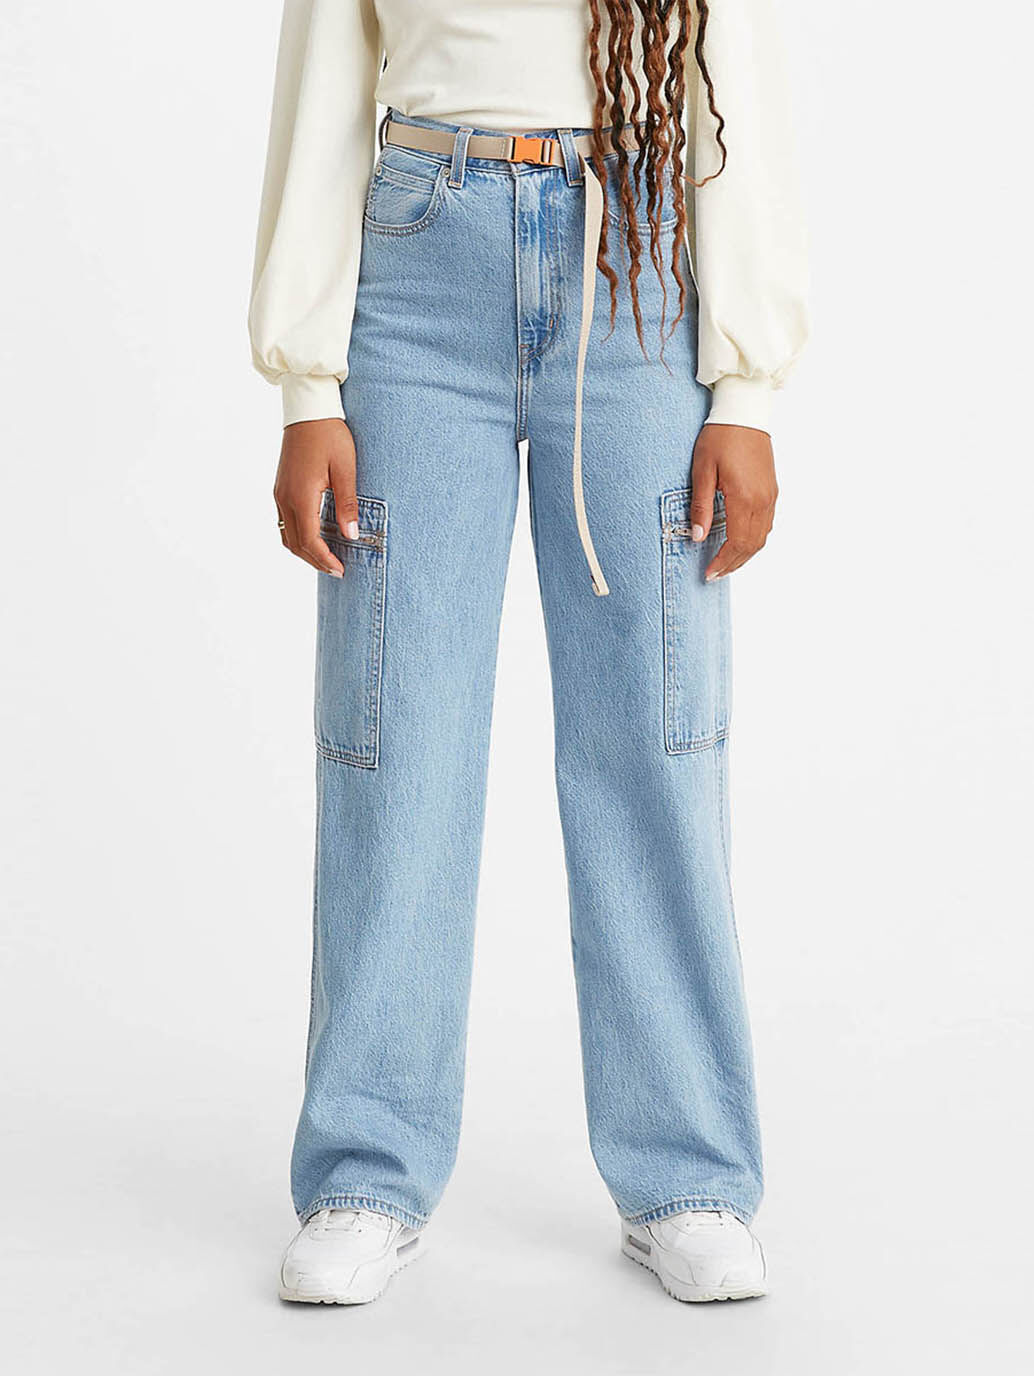 relaxed fit jeans womens levis